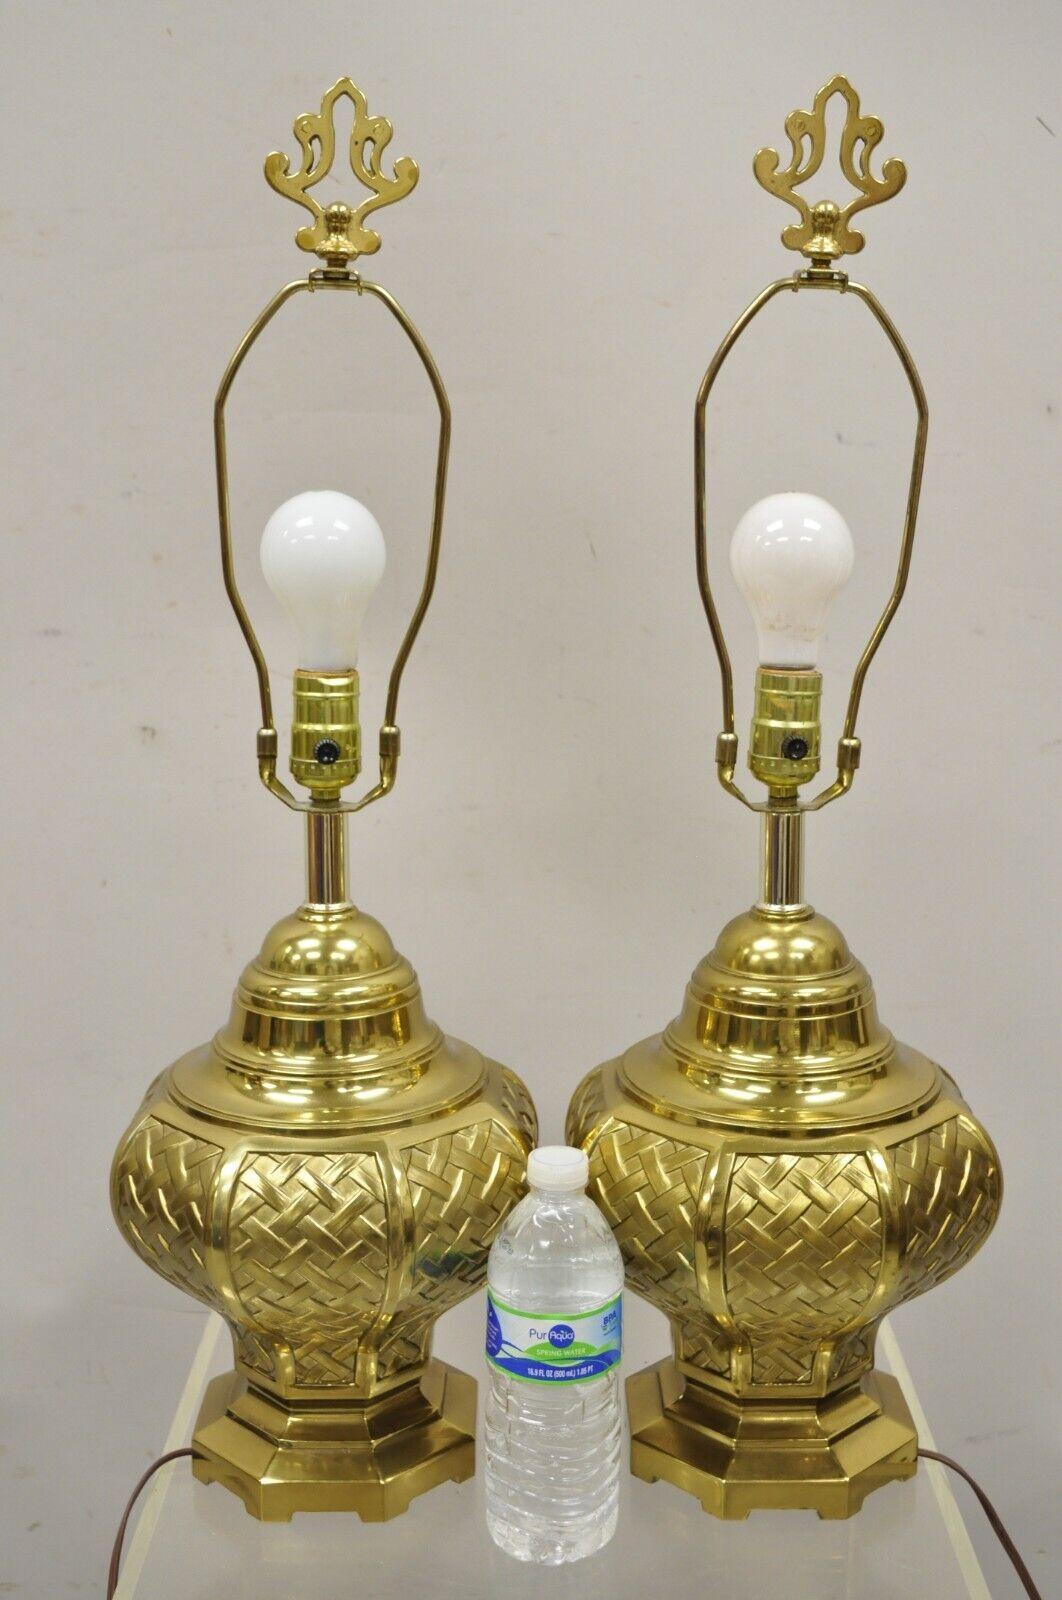 Vintage brass woven basket basketweave Hollywood Regency table lamps - a pair. Item features ornate finials, basketweave woven bodies, very nice vintage pair, great style and form. Circa mid to late 20th century. Measurements: 27